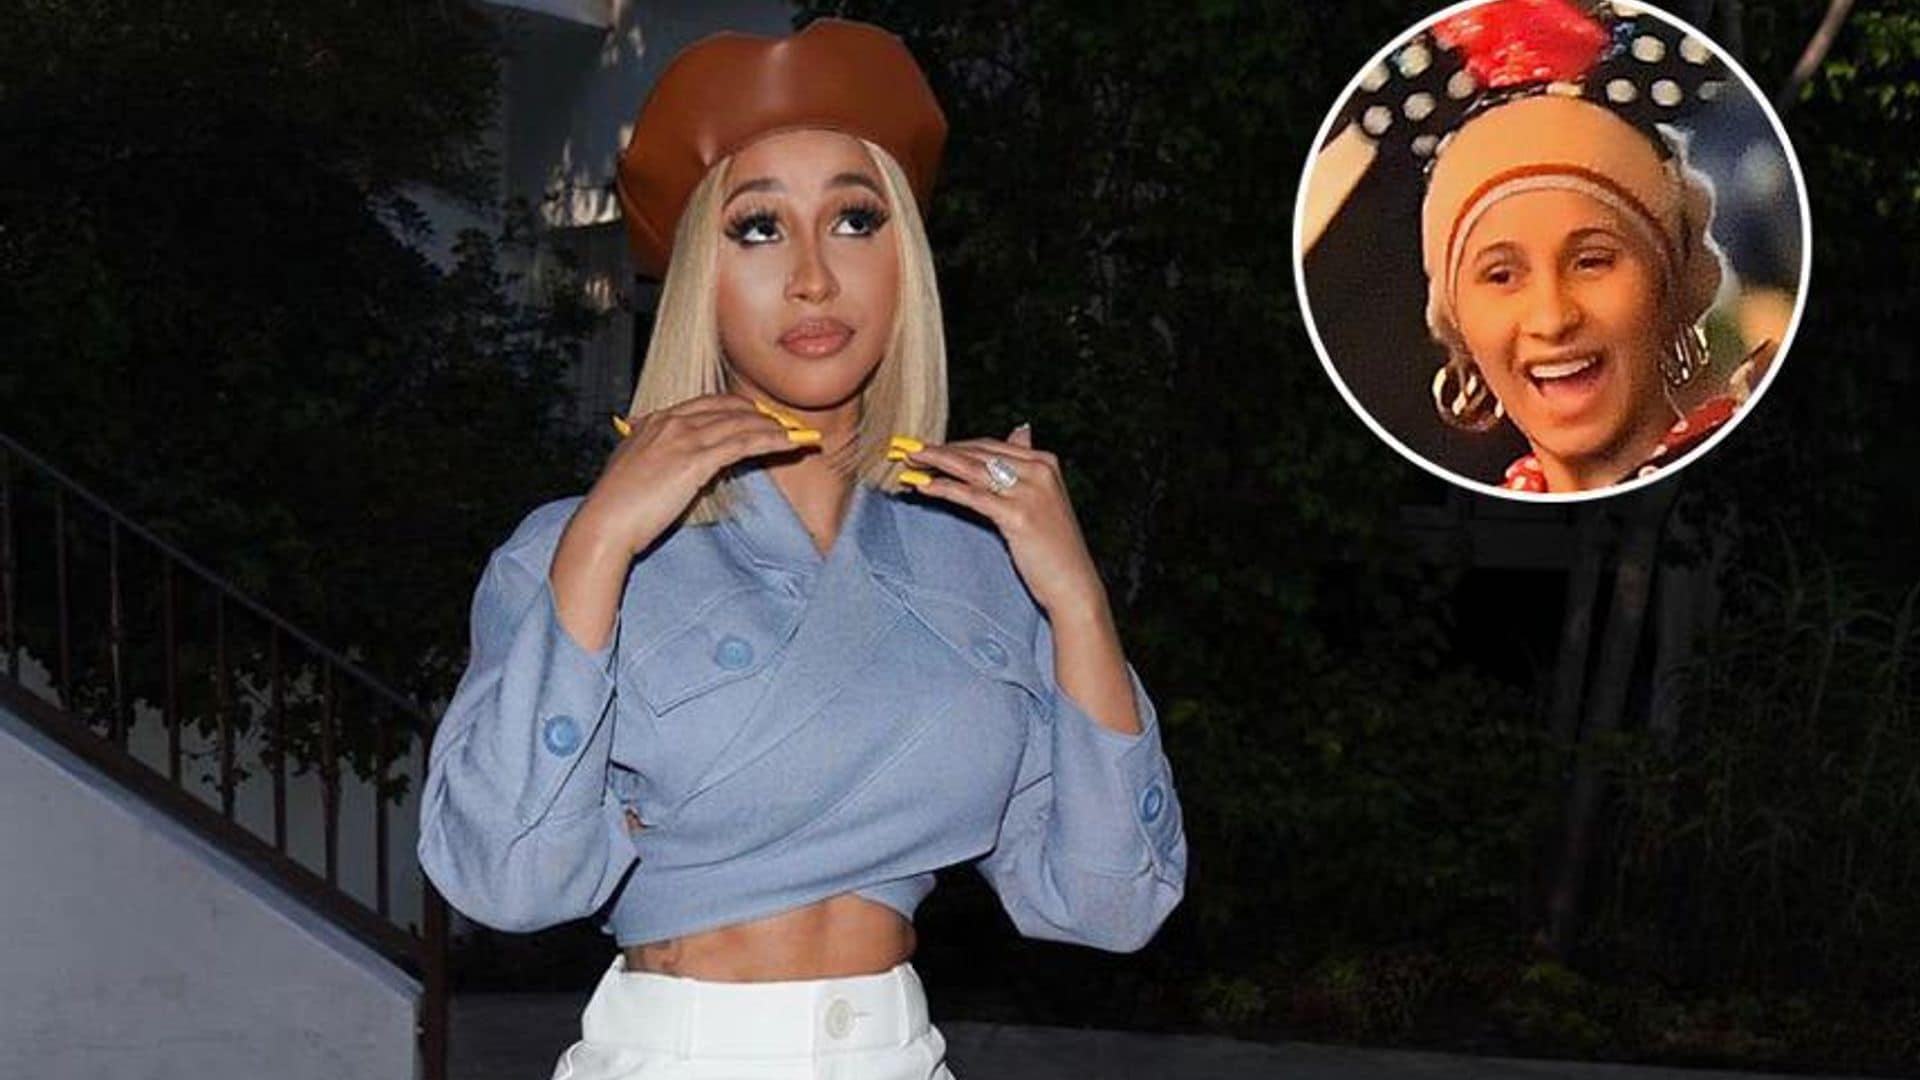 Cardi b is completely unrecognizable without makeup - see the photos!